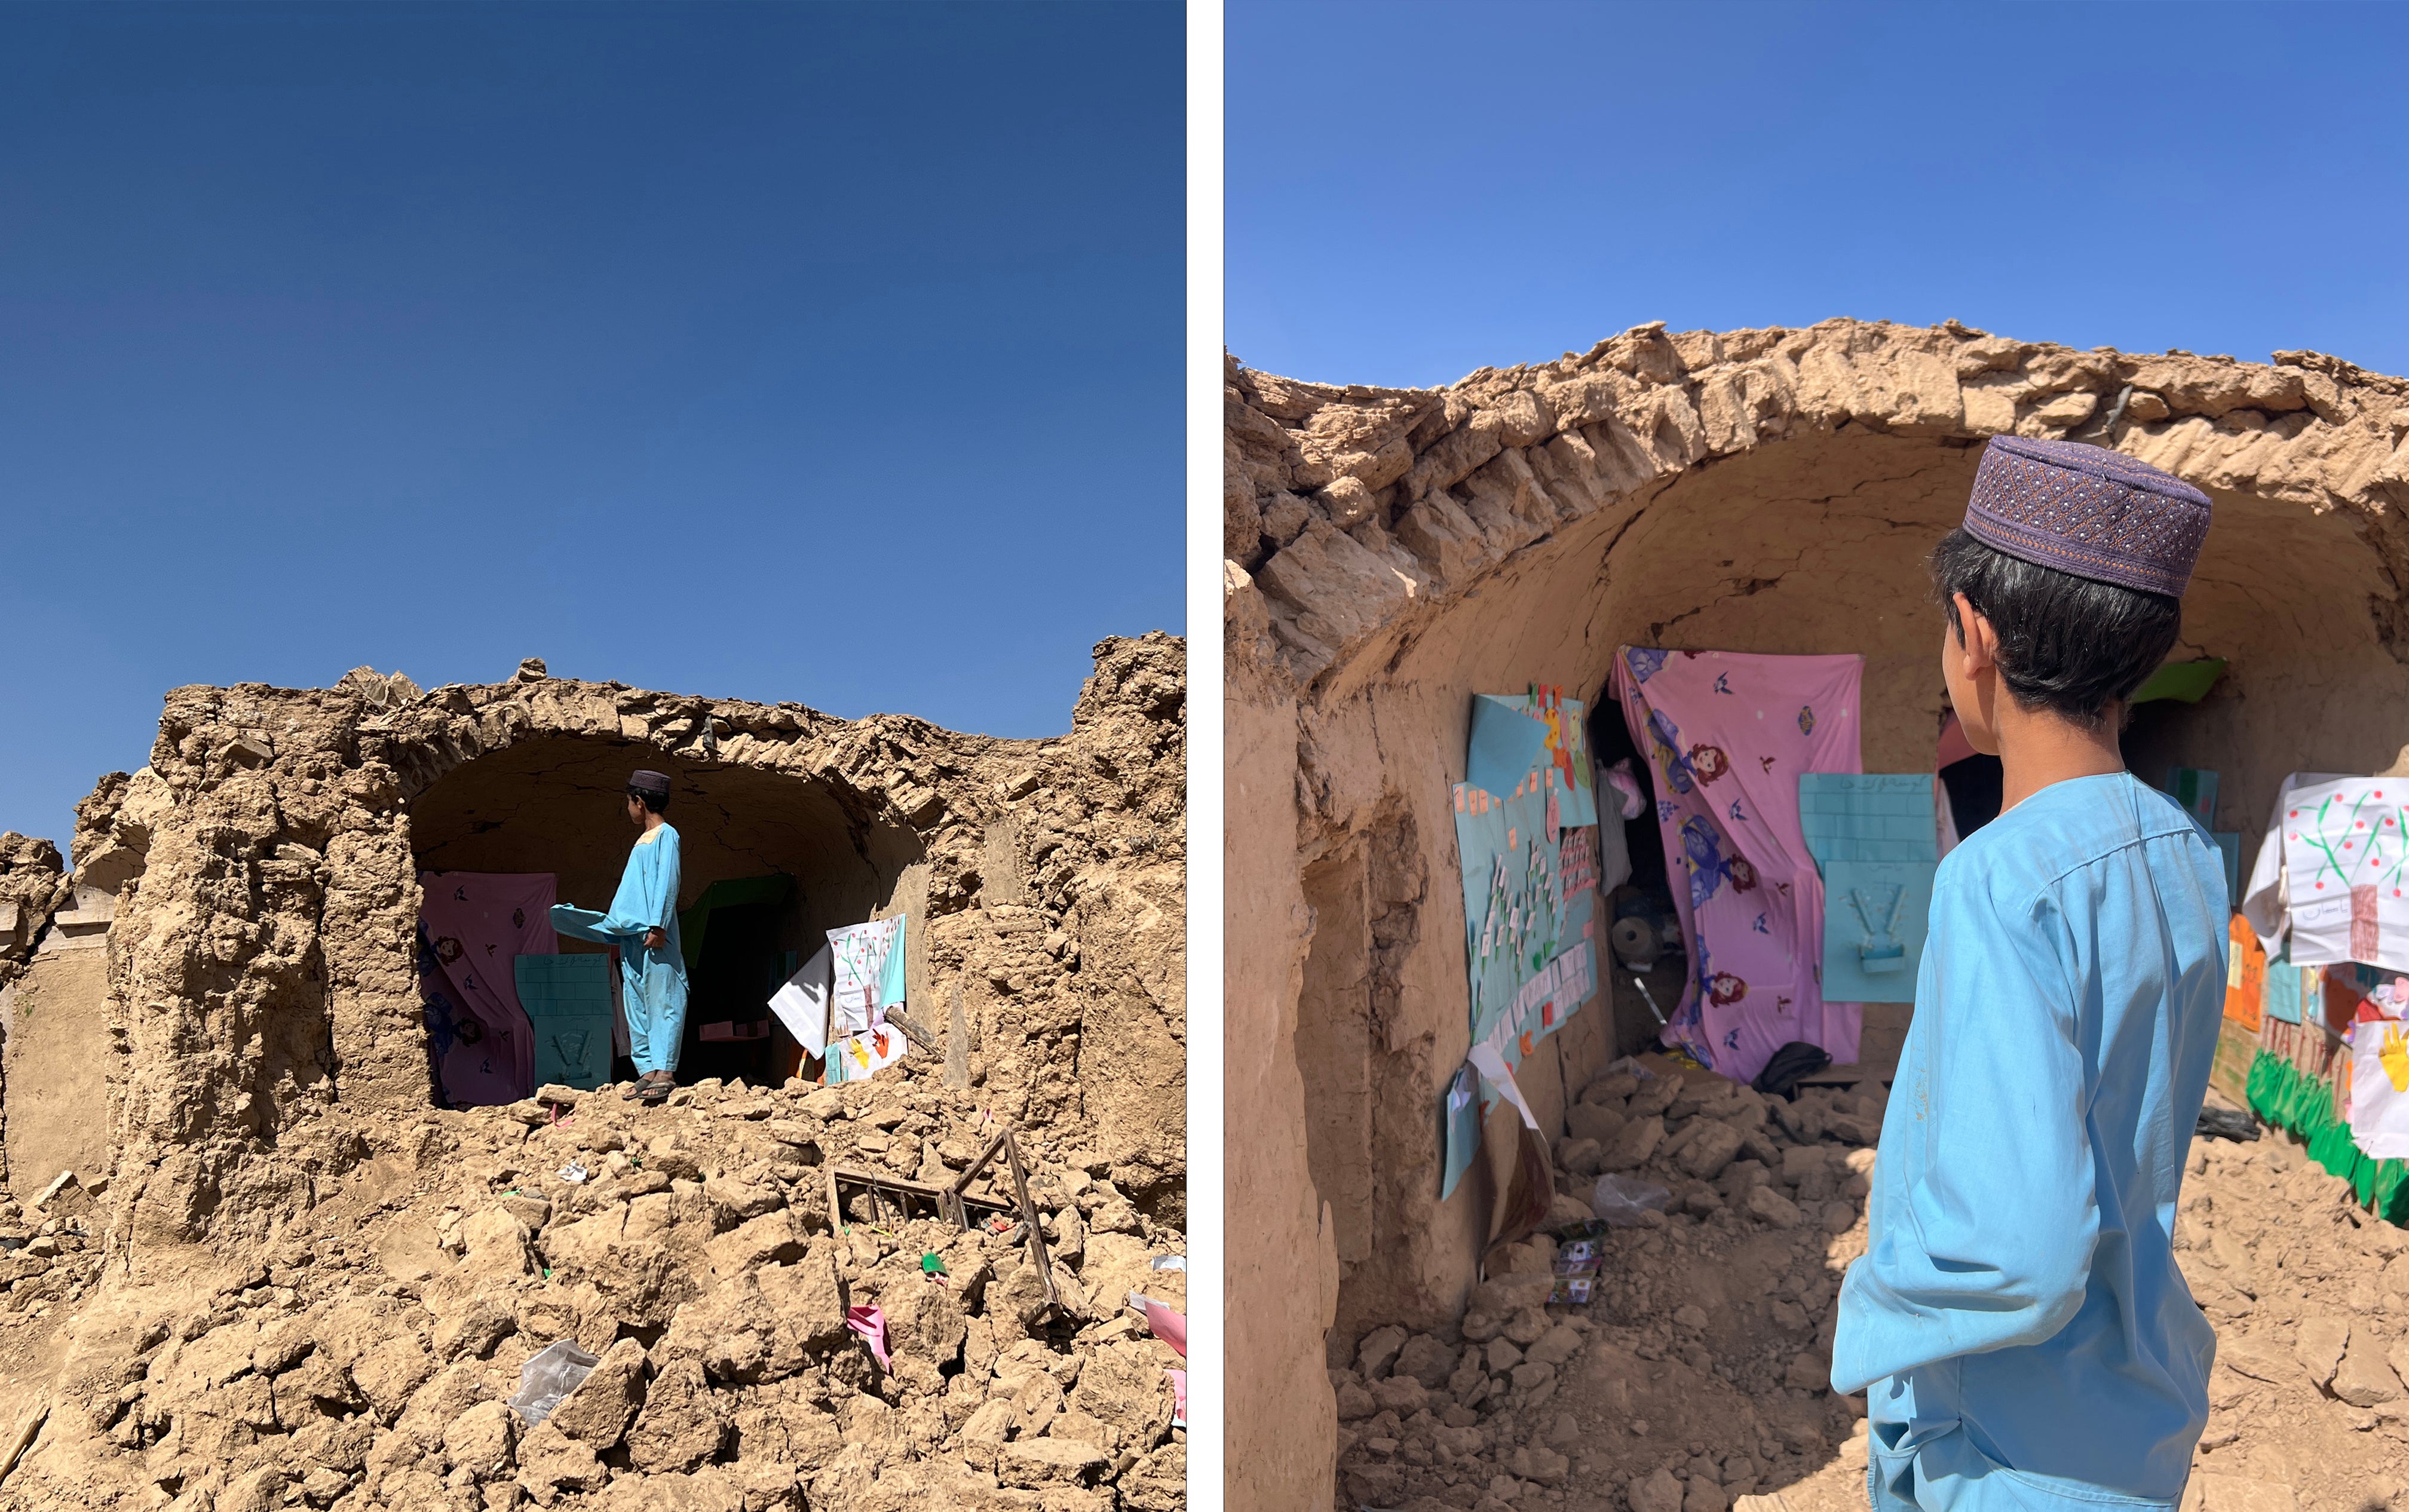 A young boy stands amongst the rubble of one of our early childhood education space. Some of the children's paintings and visual learning charts remain, but the classroom is destroyed.